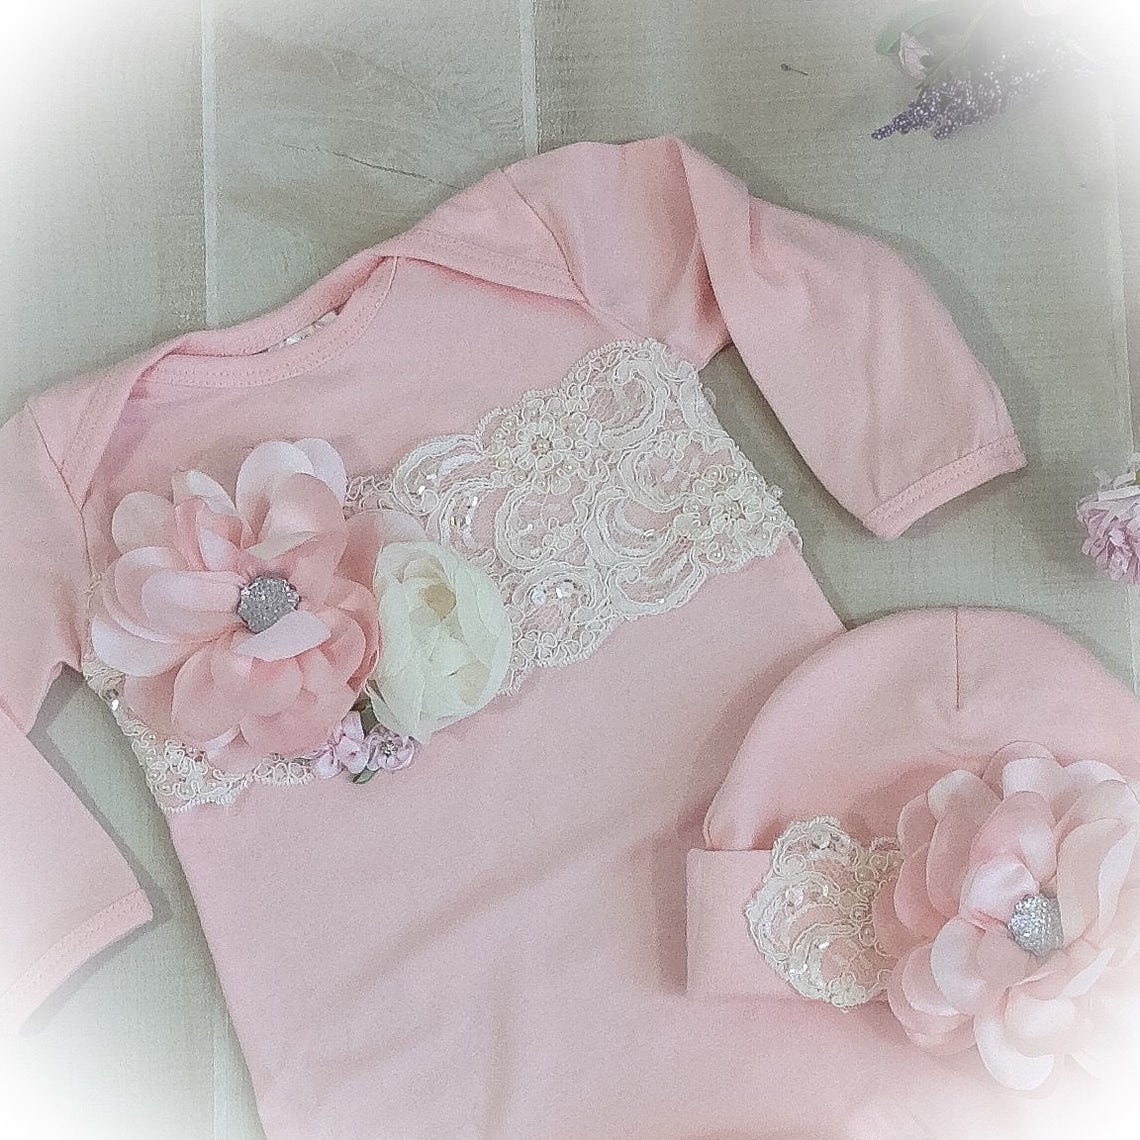 Newborn Girl Take Home Outfit Blush Pink Layette Gown | Etsy